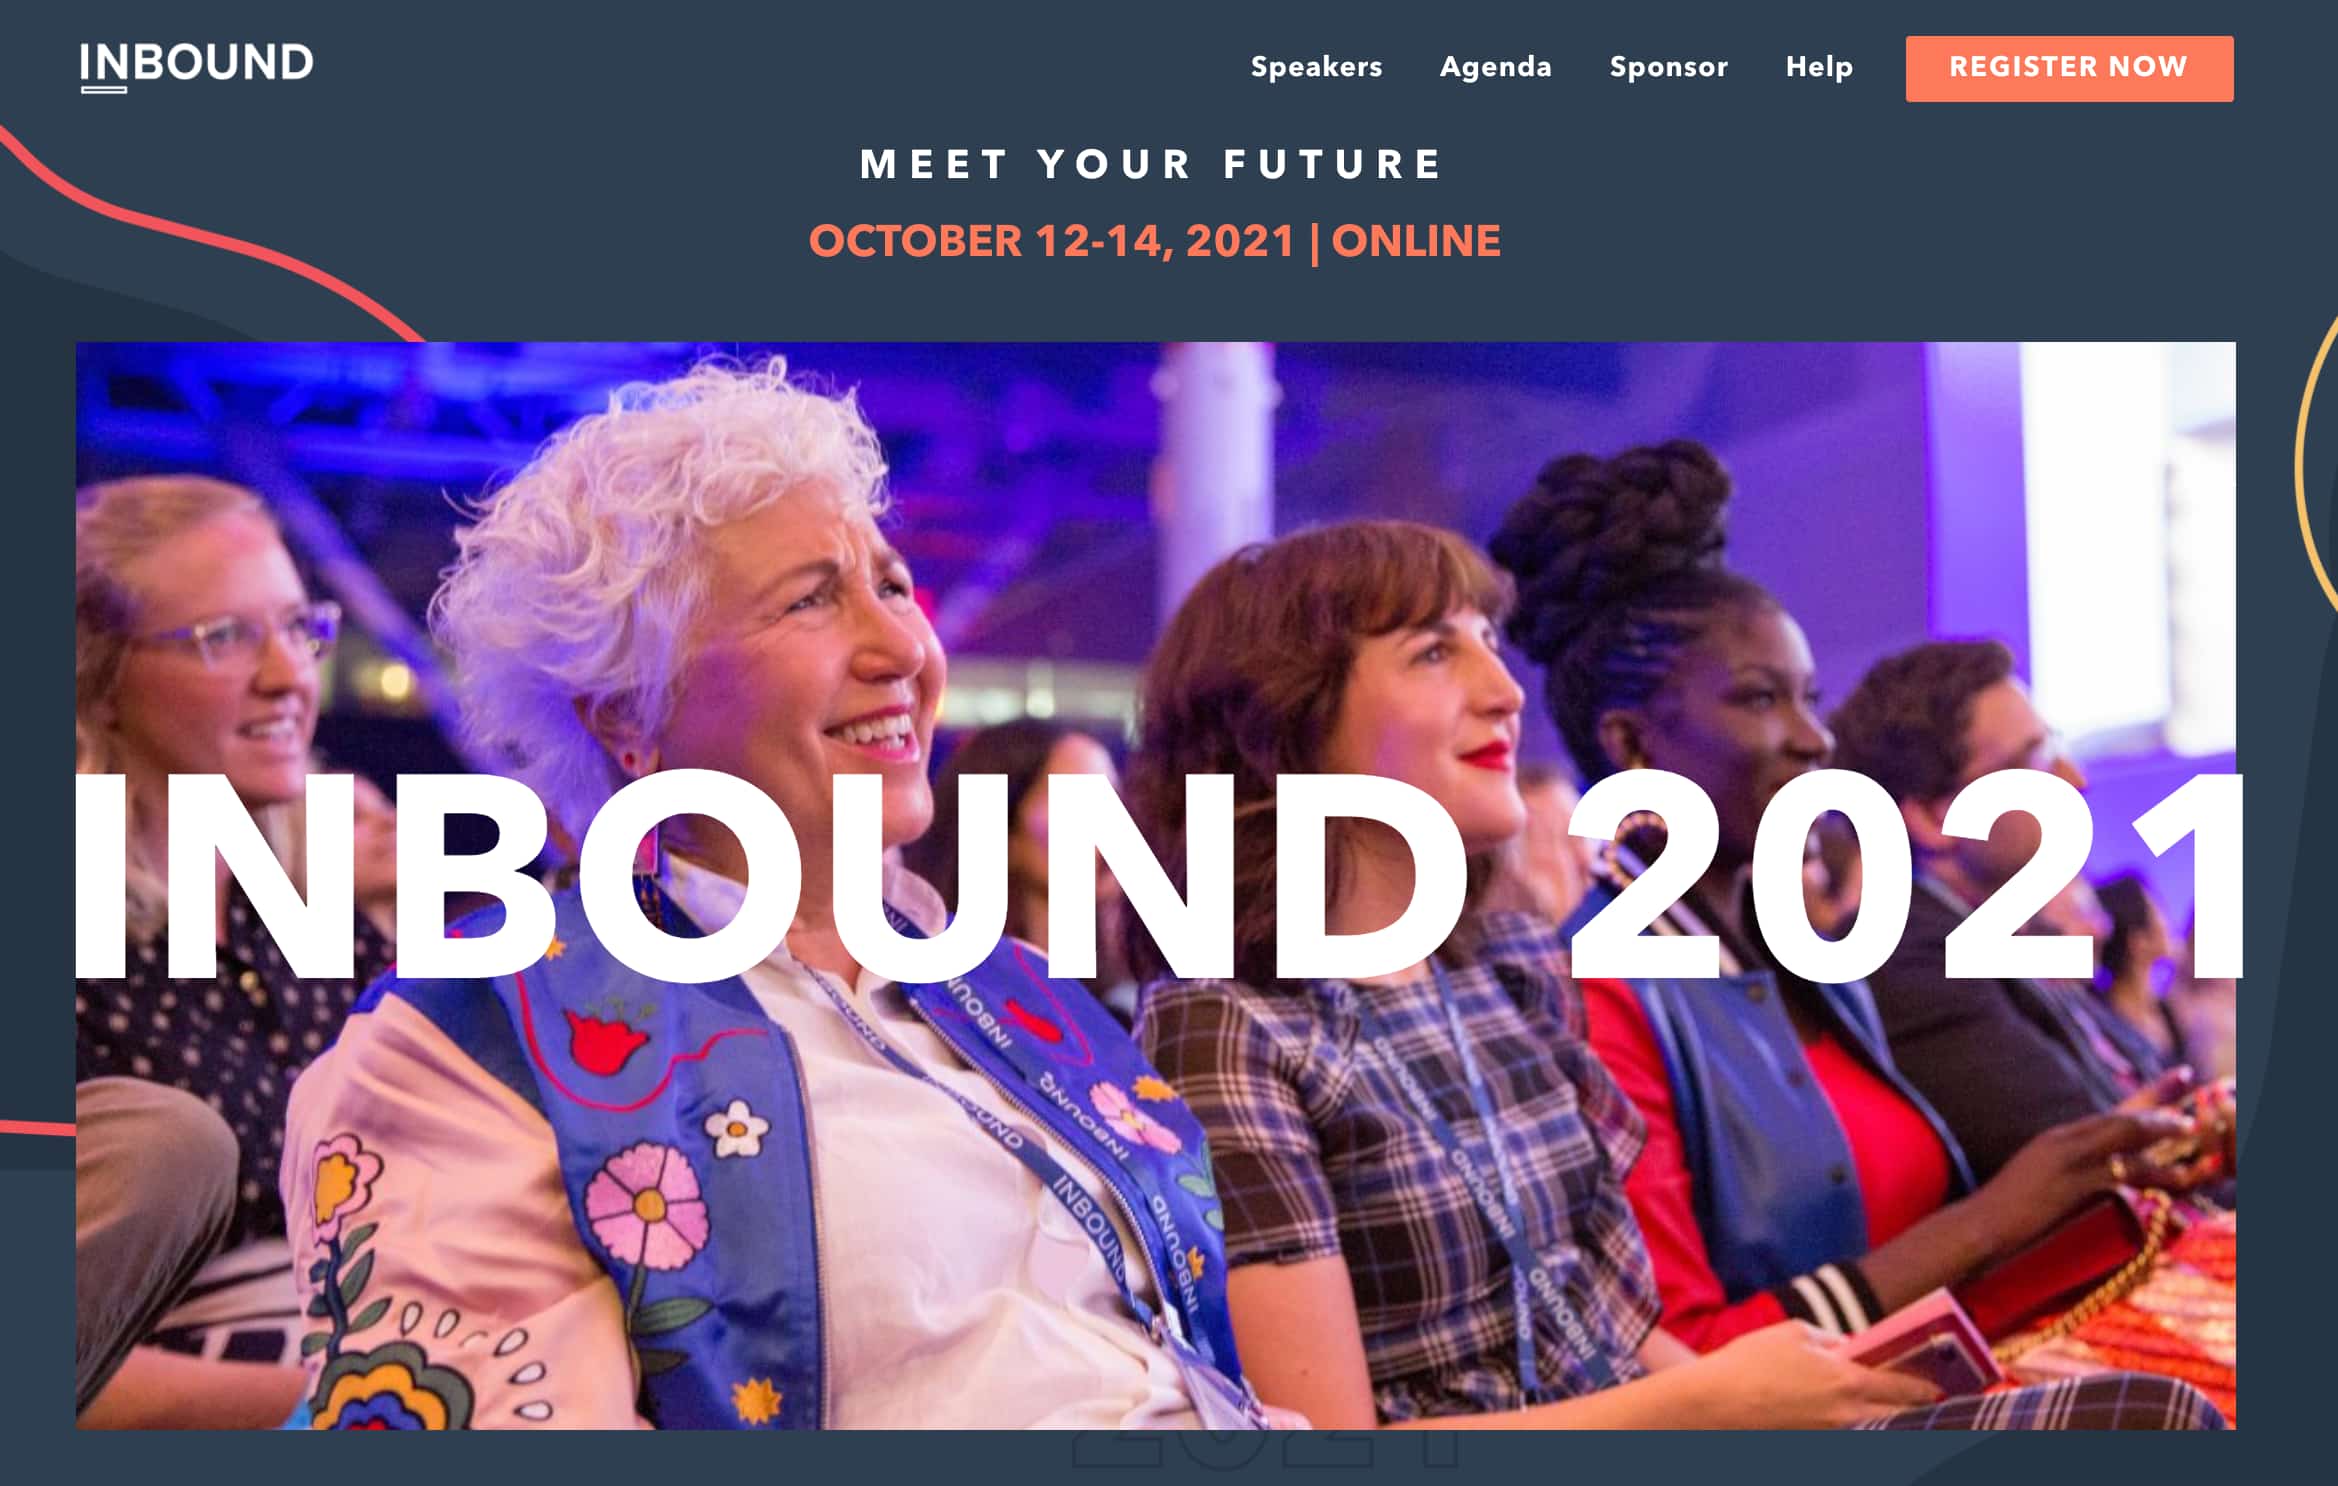 HubSpot inbound 2021 conference website homepage featuring event attendees sitting in the audience